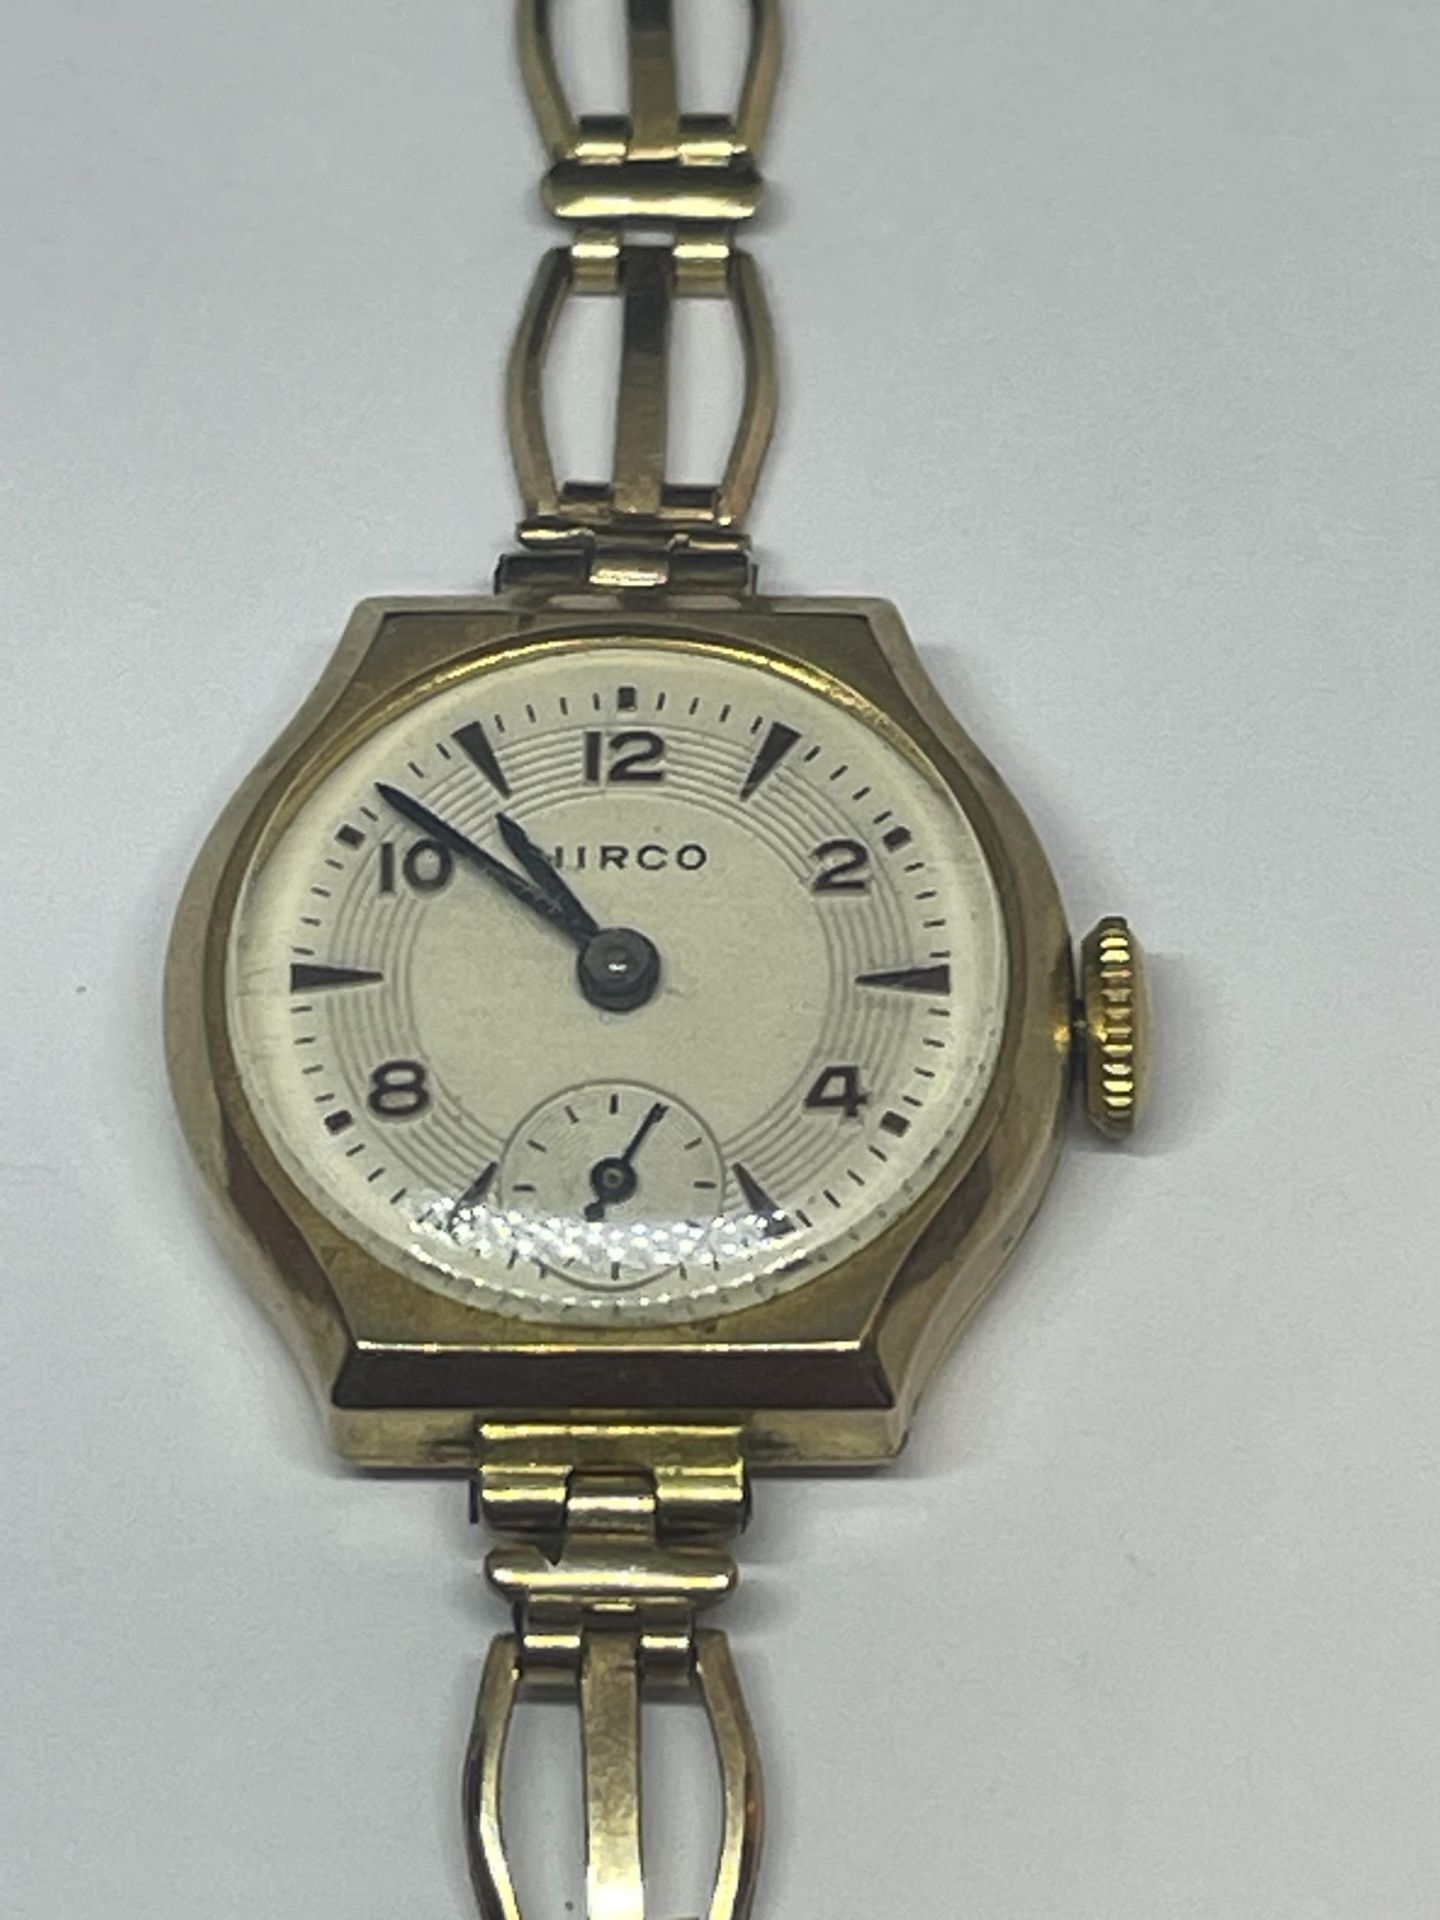 A LADIES SWISS HIRCO 9 CARAT GOLD CASED WRSIT WATCH WITH 12 CARAT GOLD PLATED STRAP SEEN WORKING - Image 2 of 5